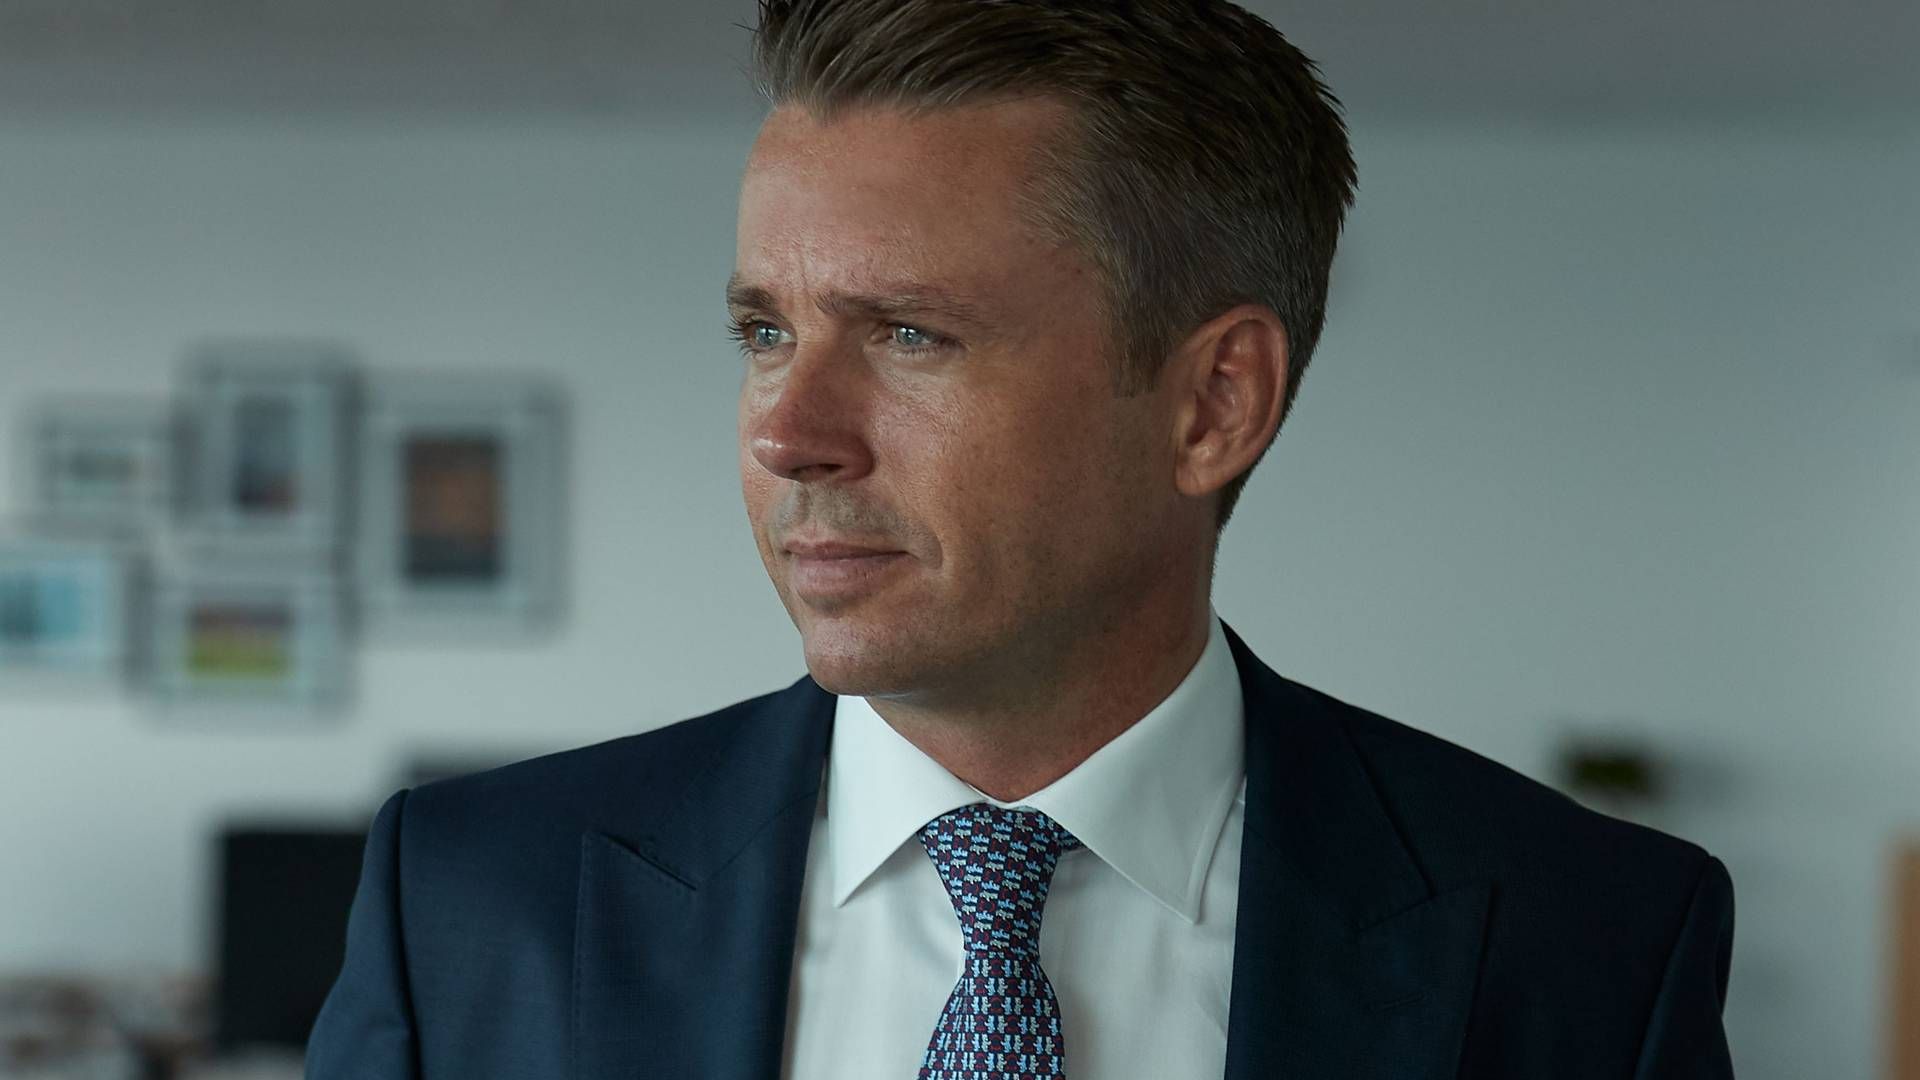 Anders Østergaard, CEO and owner of the oil group Monjasa. | Photo: PR-foto Monjasa Holding